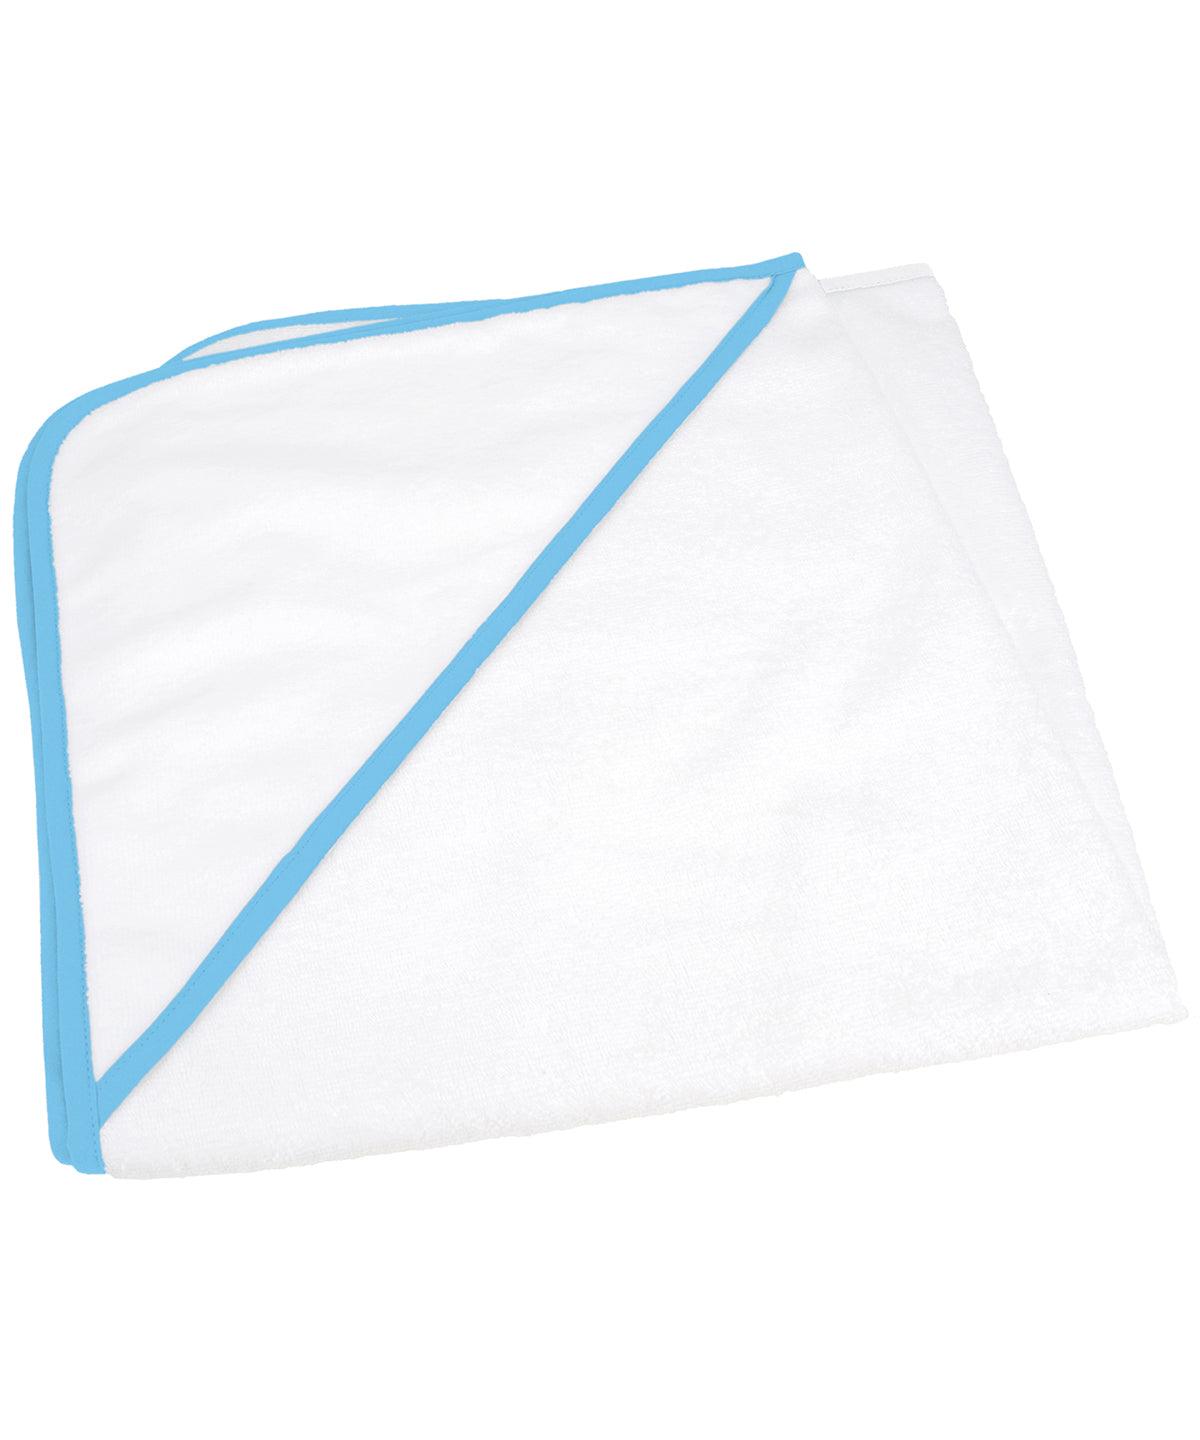 White/Light Blue - ARTG® Babiezz® all-over sublimation hooded baby towel Towels A&R Towels Baby & Toddler, Gifting & Accessories, Homewares & Towelling, Sublimation Schoolwear Centres